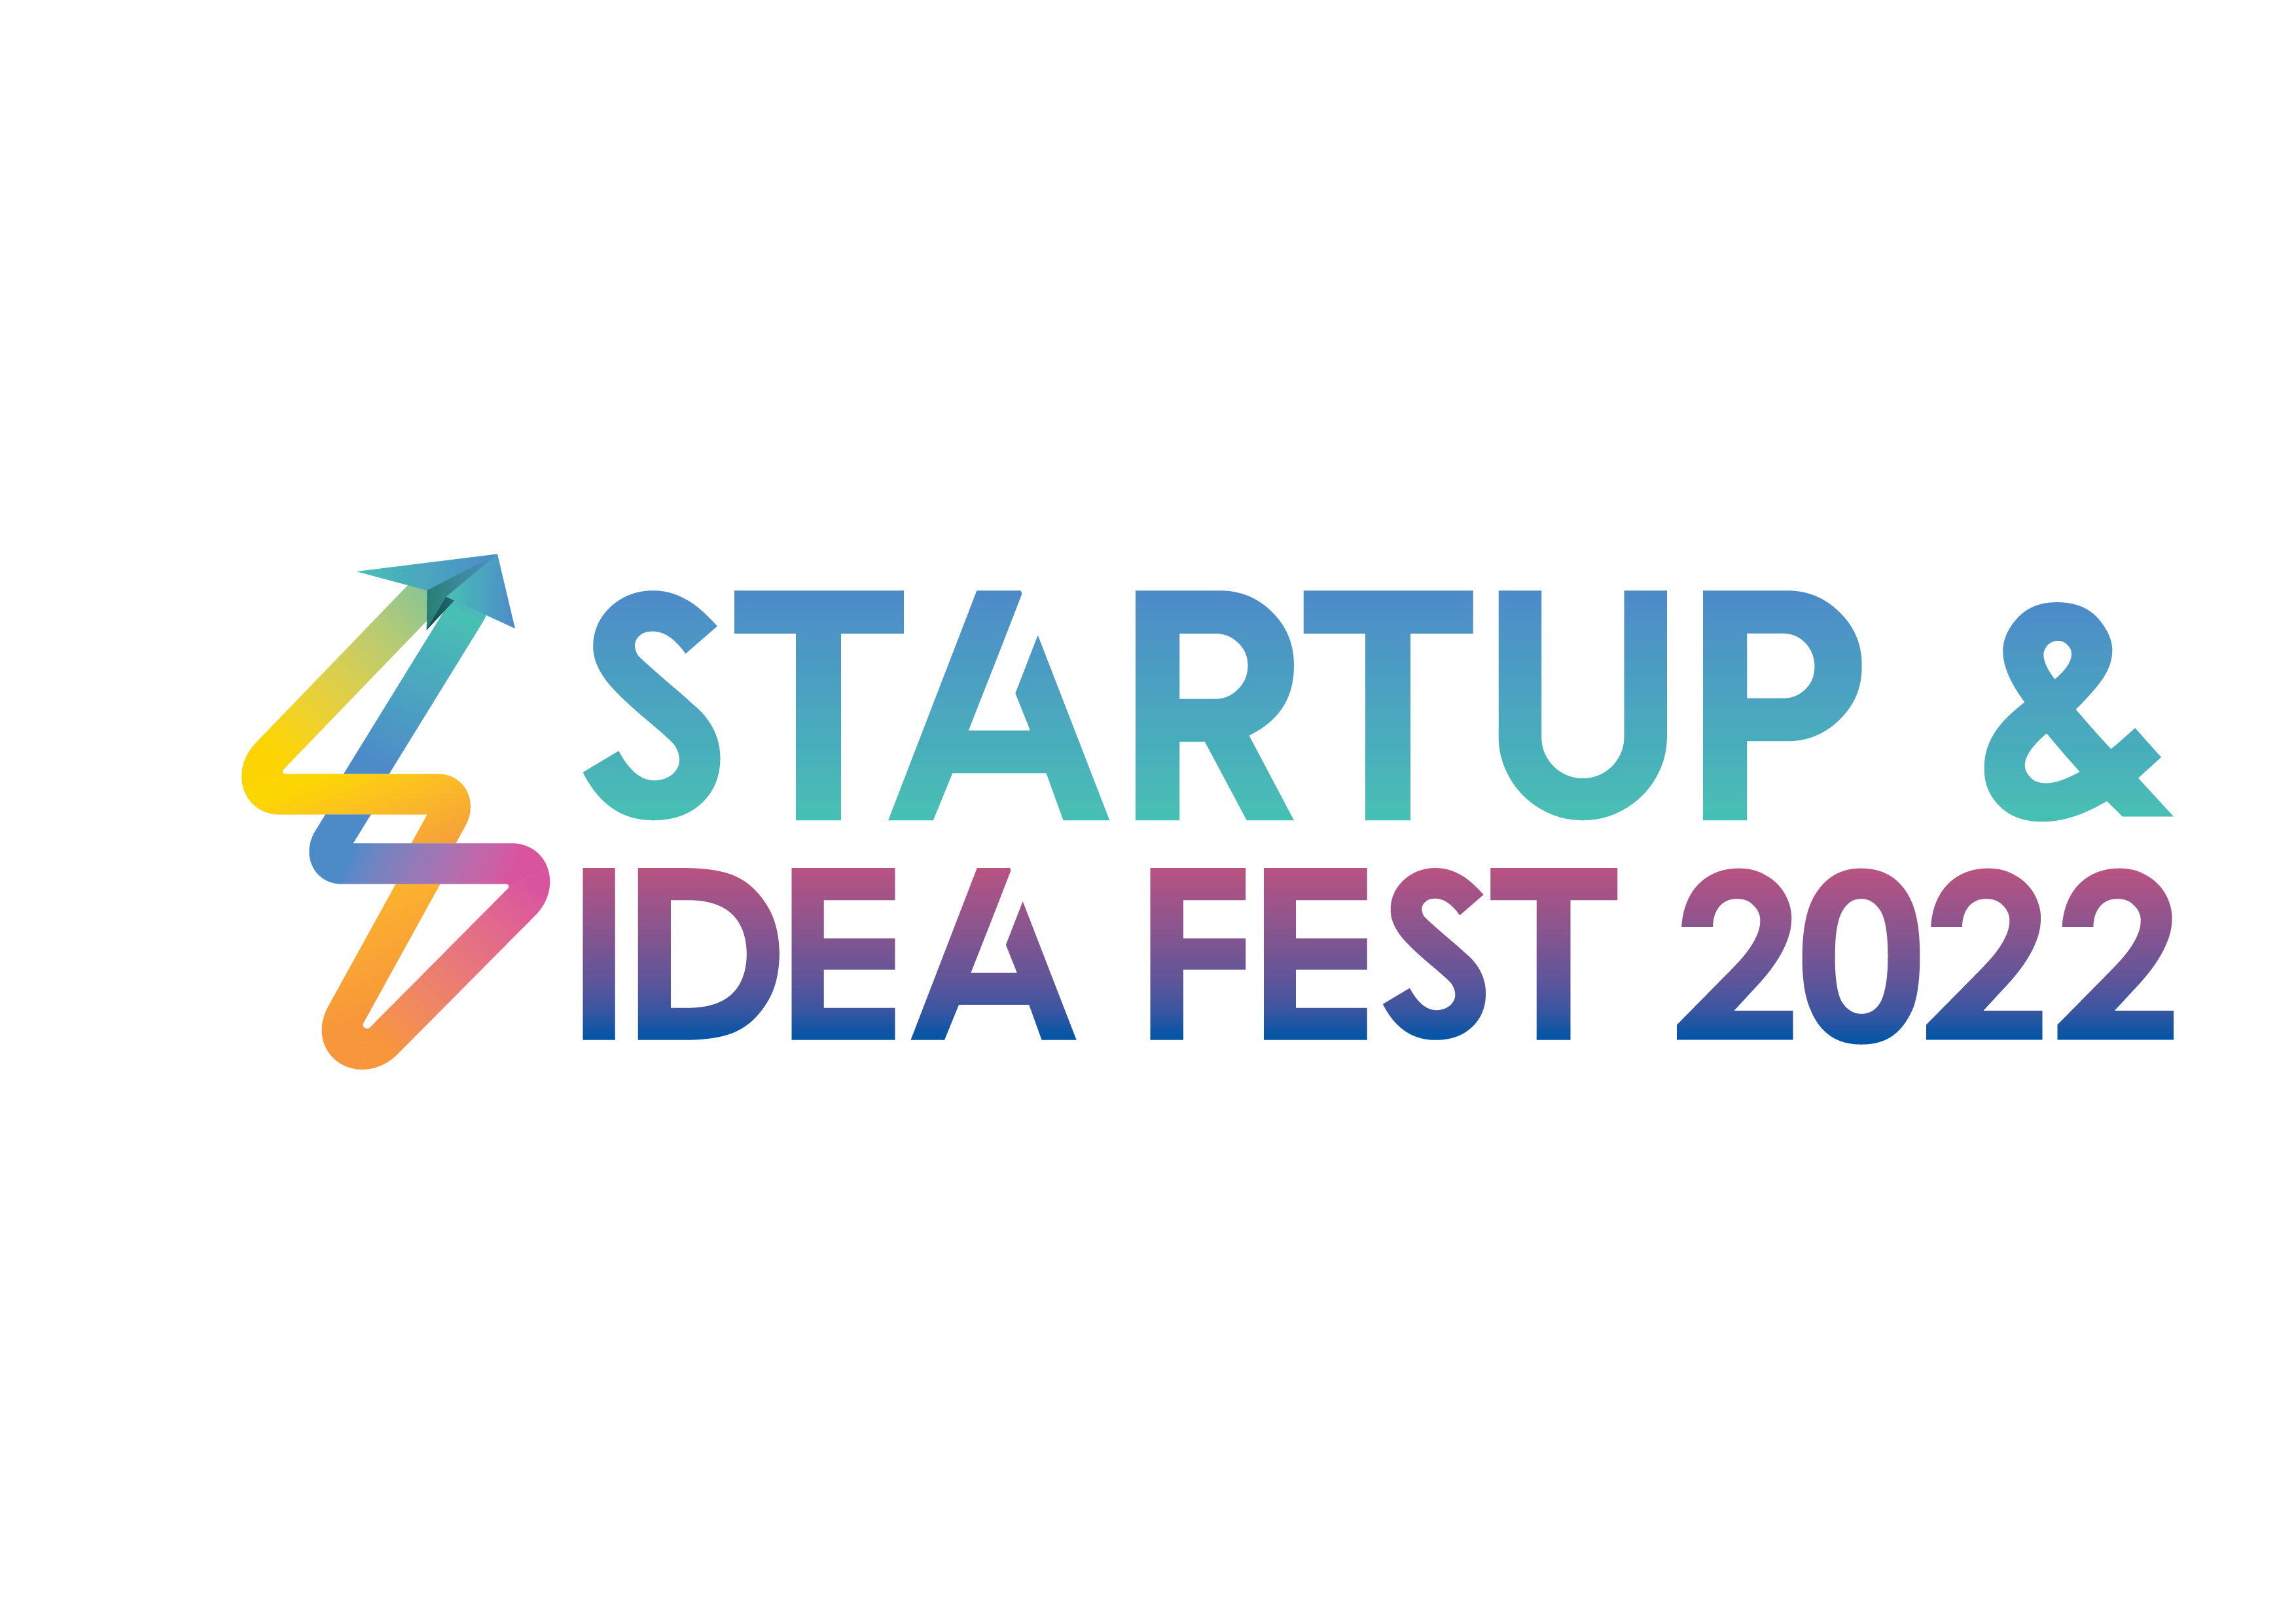 Living with ICT to organise ‘Startup and Idea Fest’ in Kathmandu